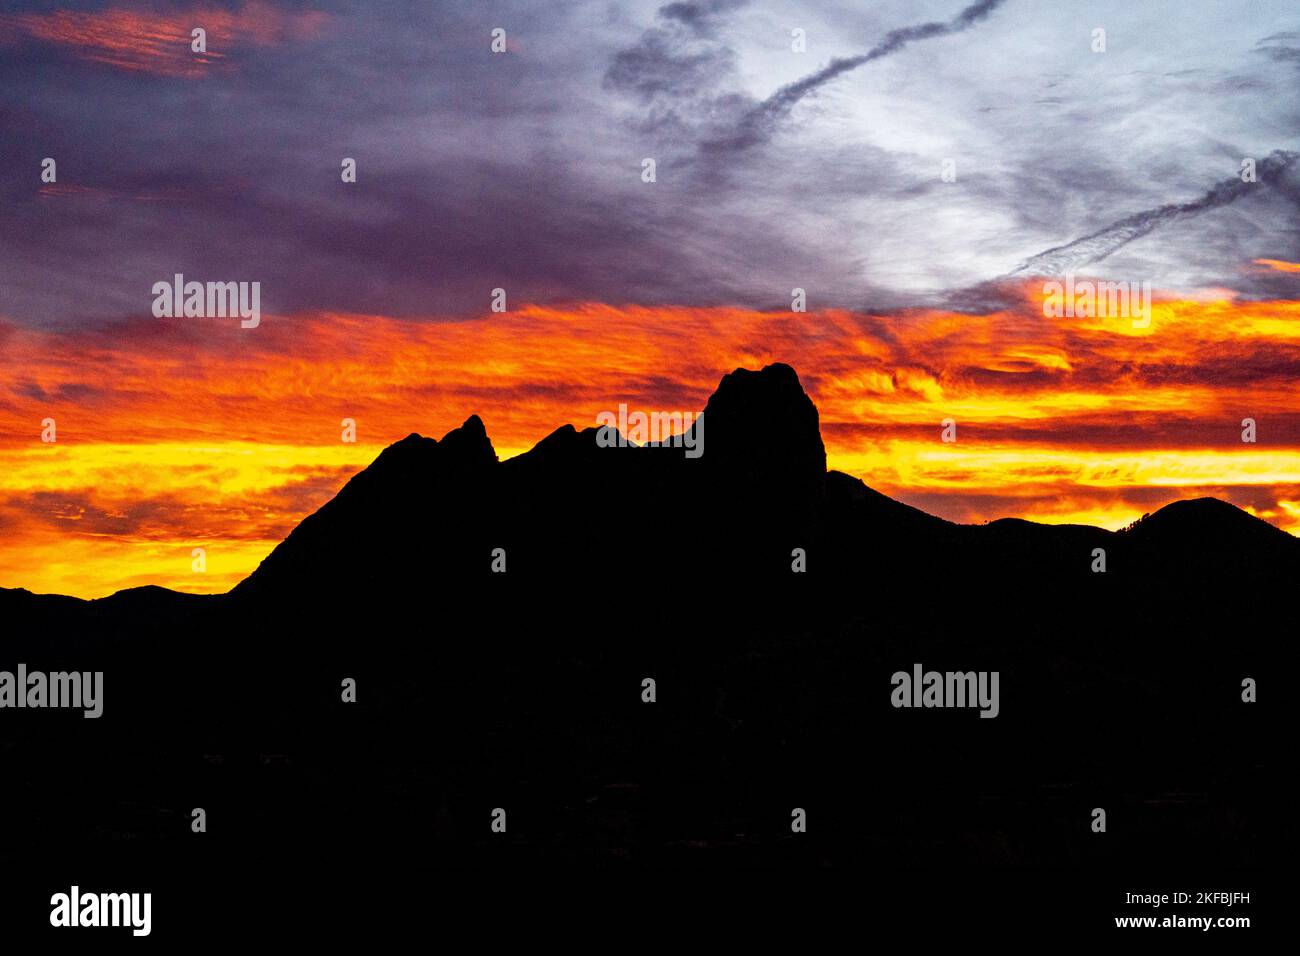 Orange cloudy sky with silhouette of a mountain Stock Photo